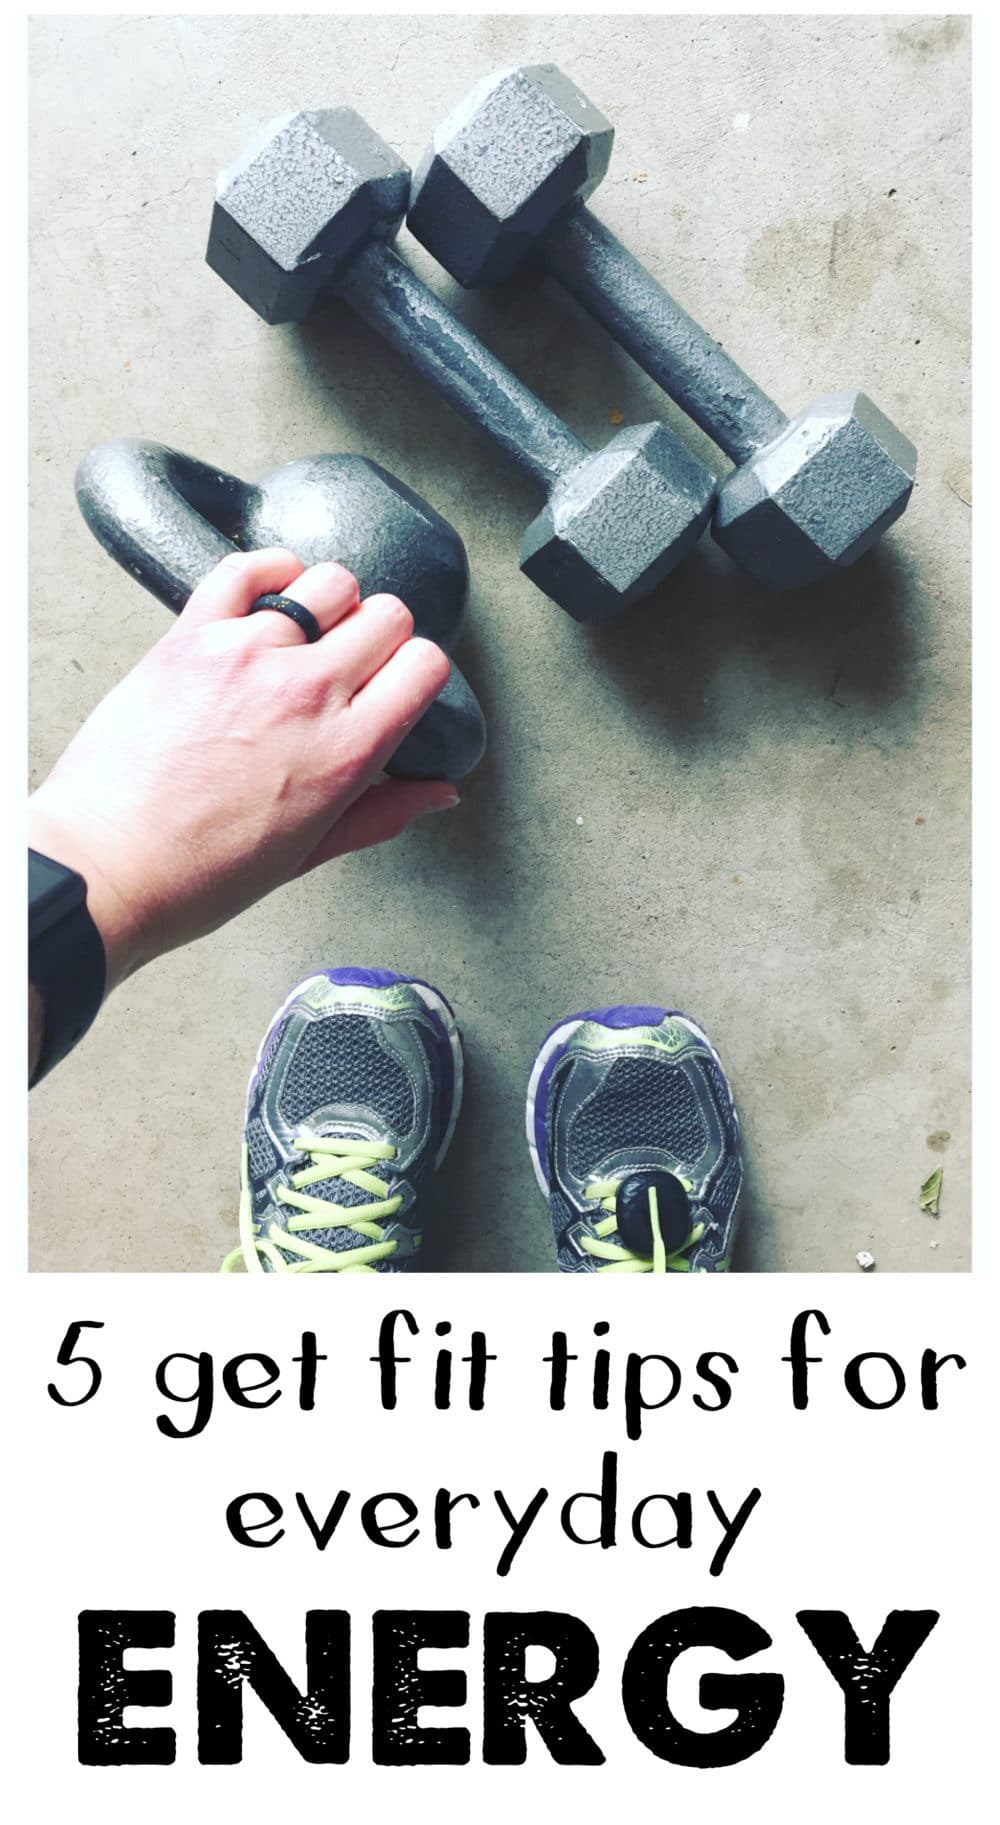 Struggling to stay active? Here's 5 get fit tips for every day energy and fitness with Bob Seebohar and @CLIFBar! - #ad @TheFitCookie #feedyouradventure #fitness